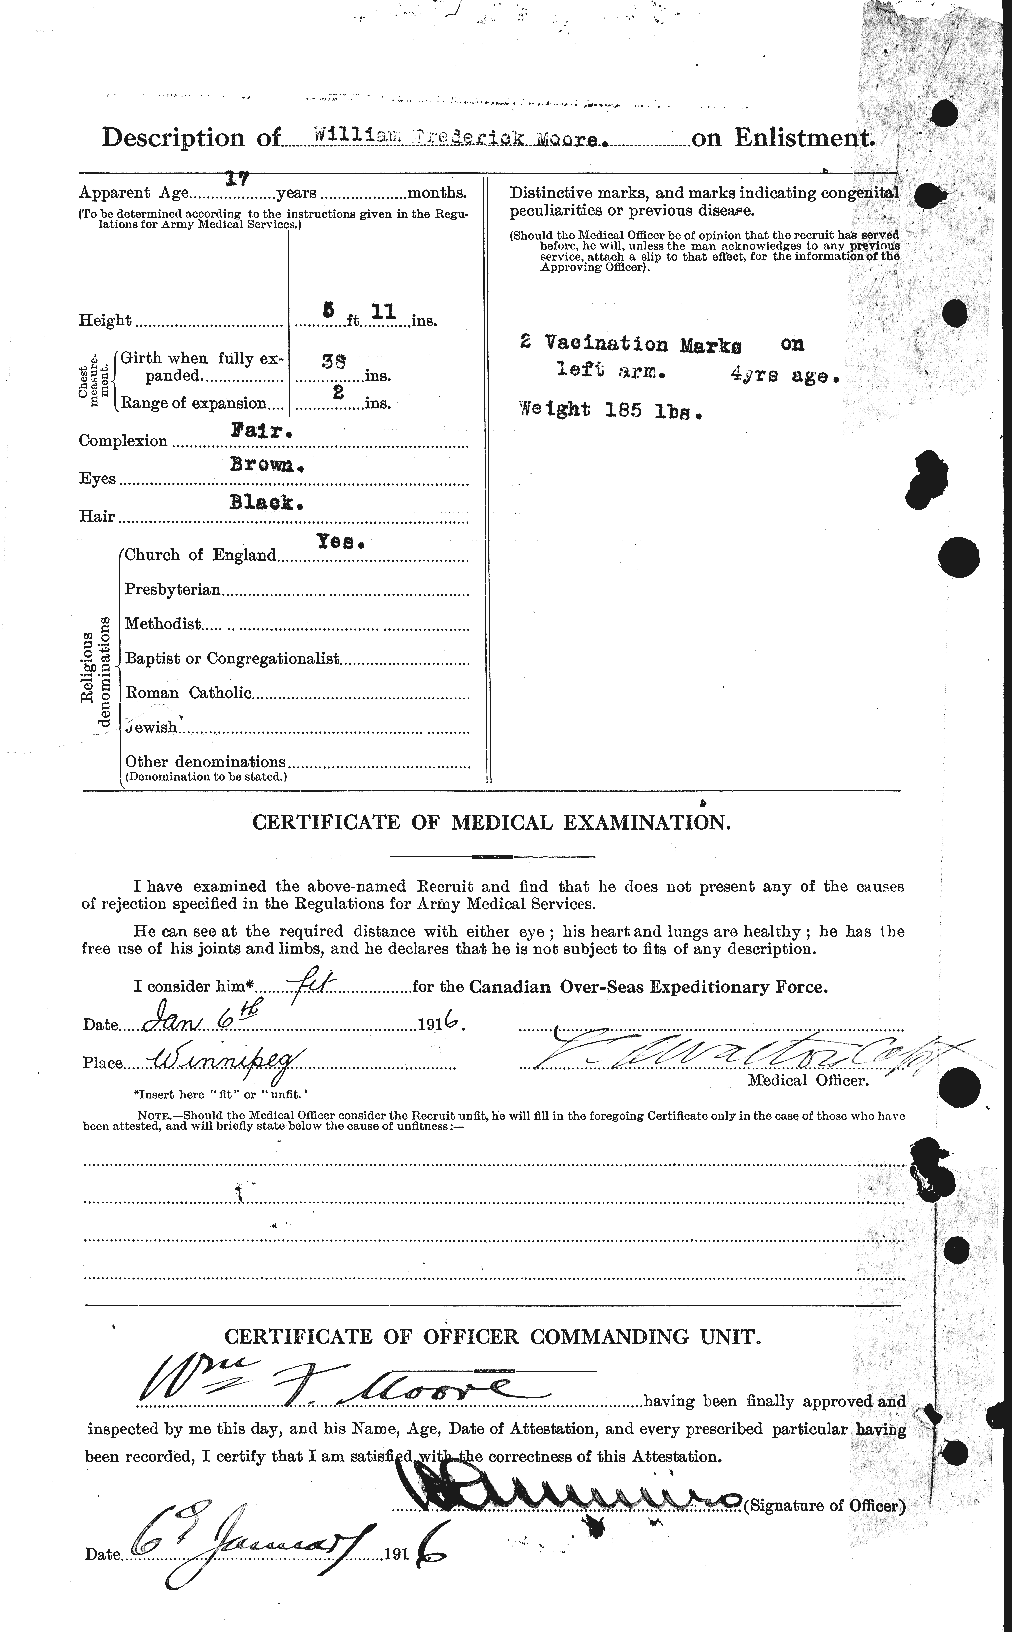 Personnel Records of the First World War - CEF 505807b